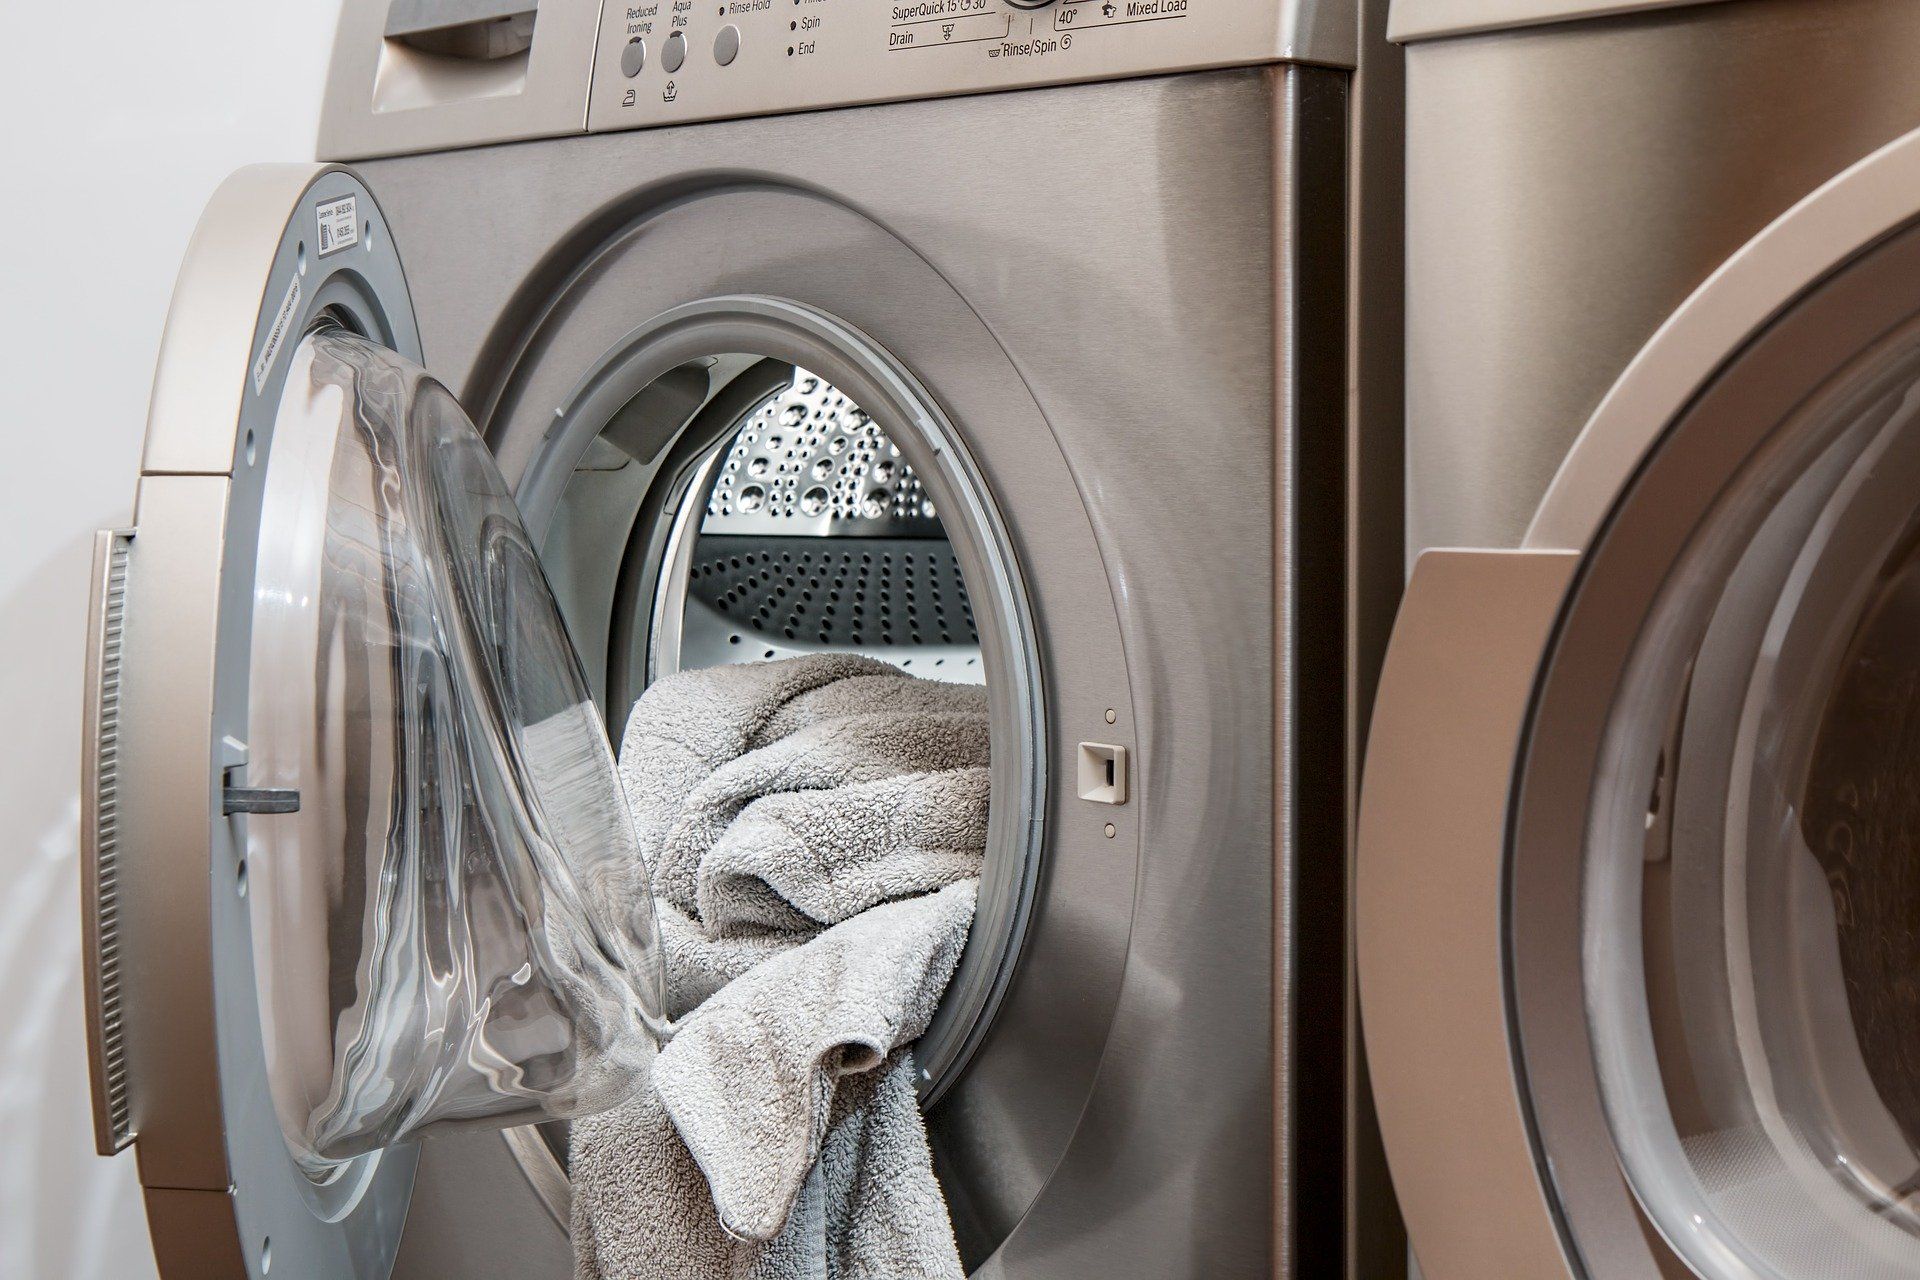 Your washing machine may be harbouring bacteria — here’s how to clean it